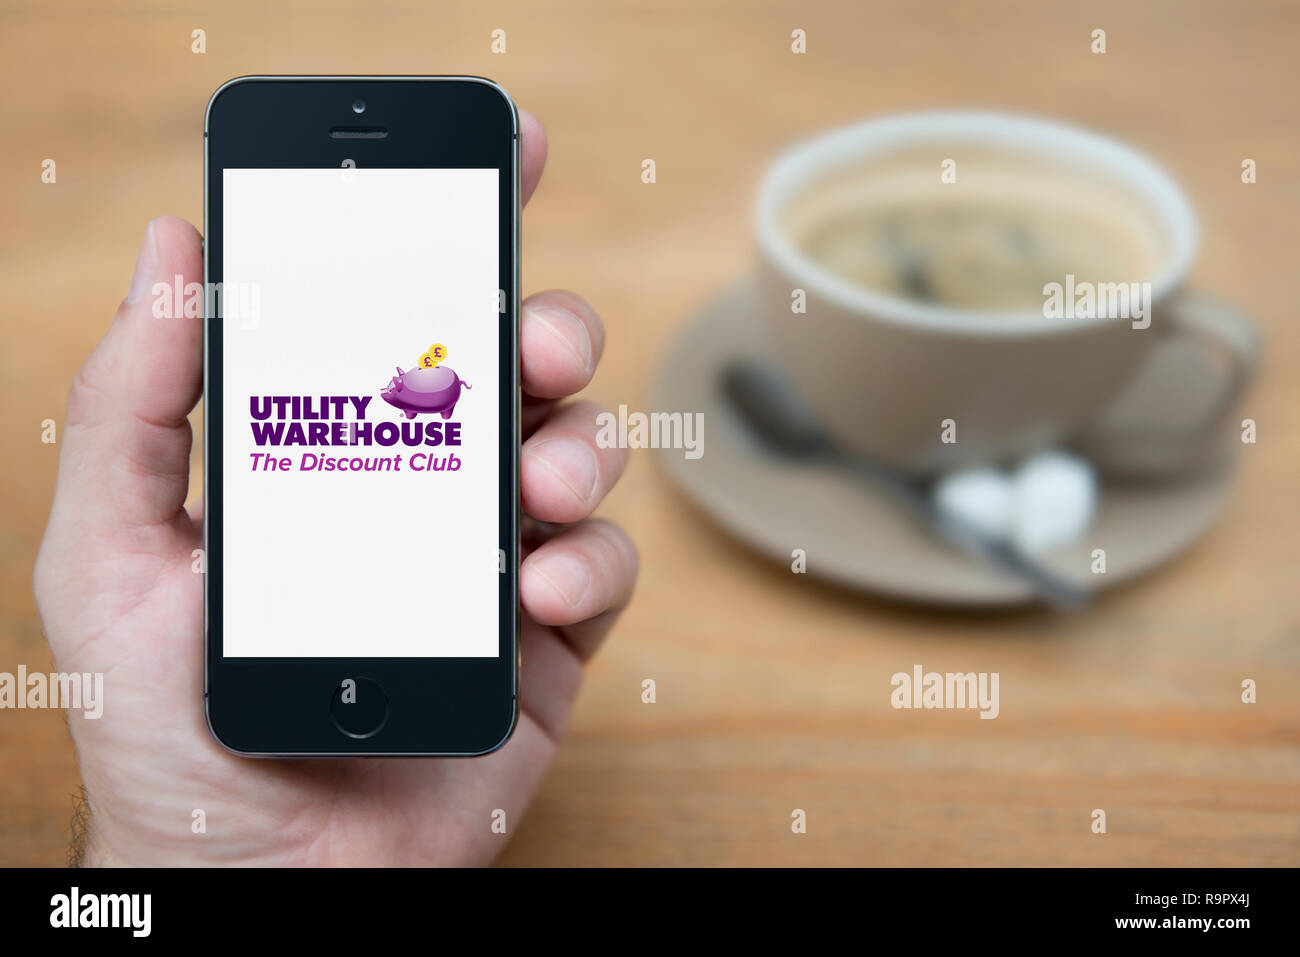 A man looks at his iPhone which displays the Utility Warehouse logo (Editorial use only). Stock Photo